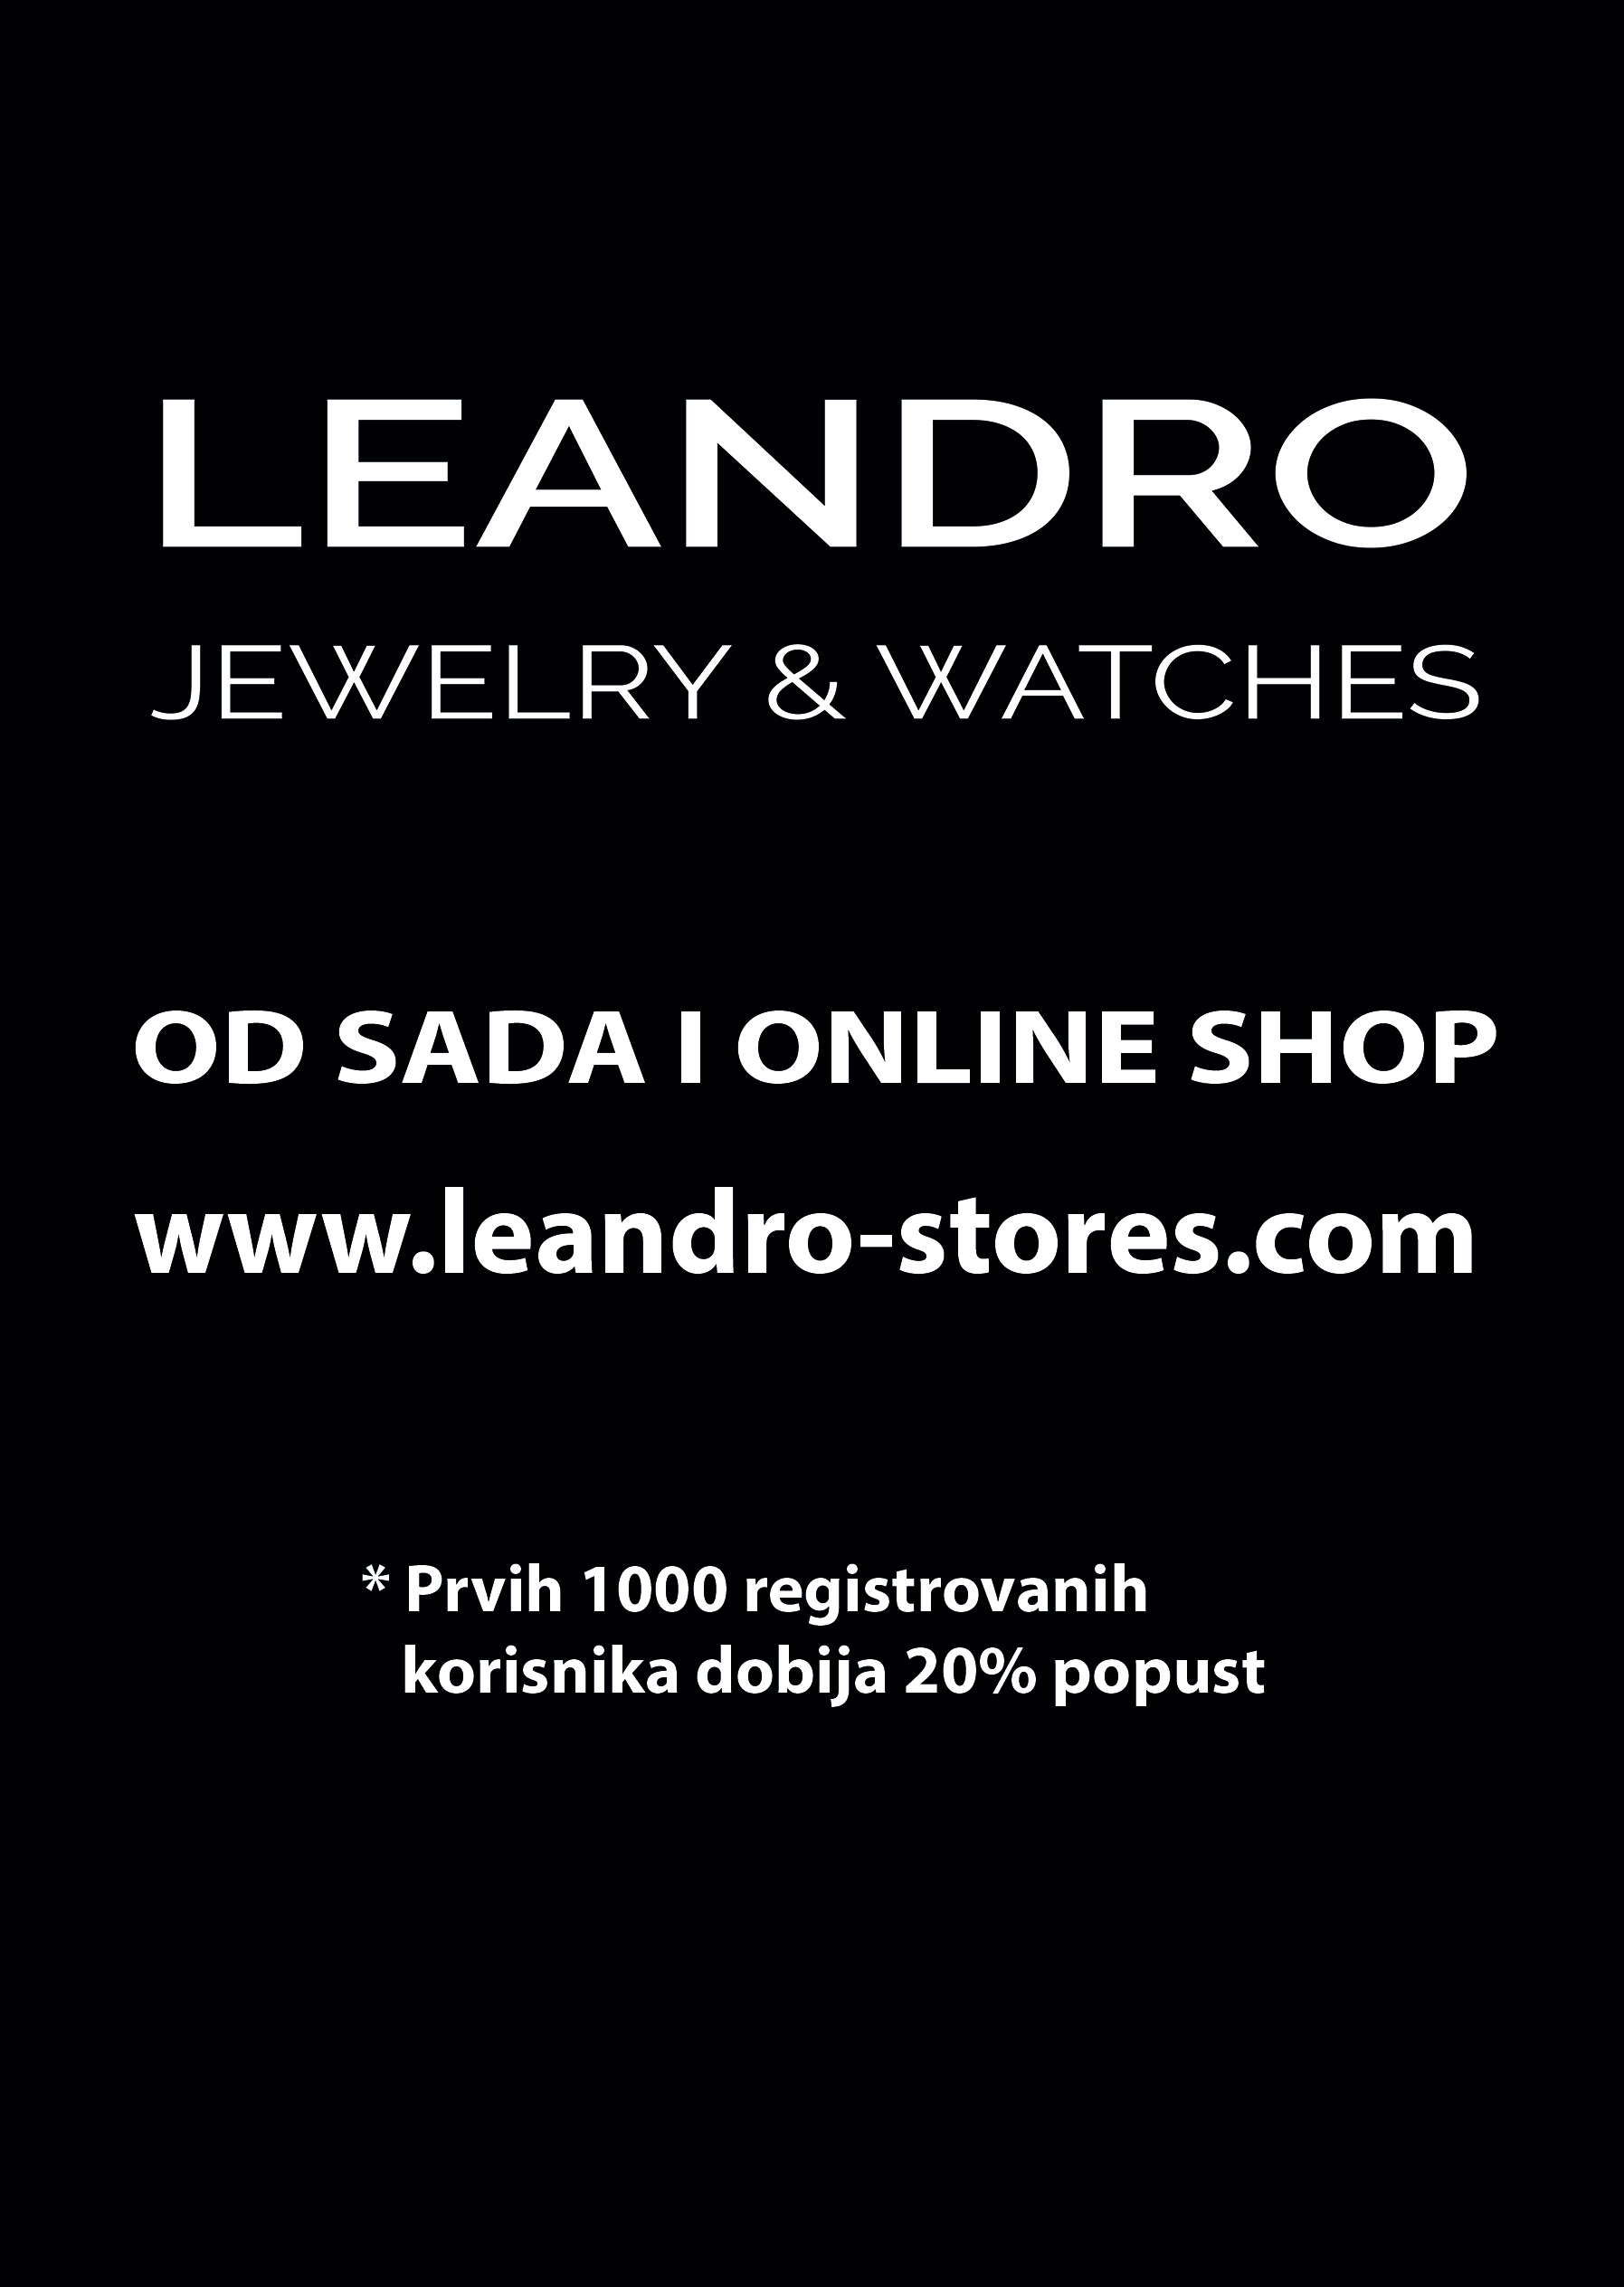 Leandro Jewelry & Watches online shop